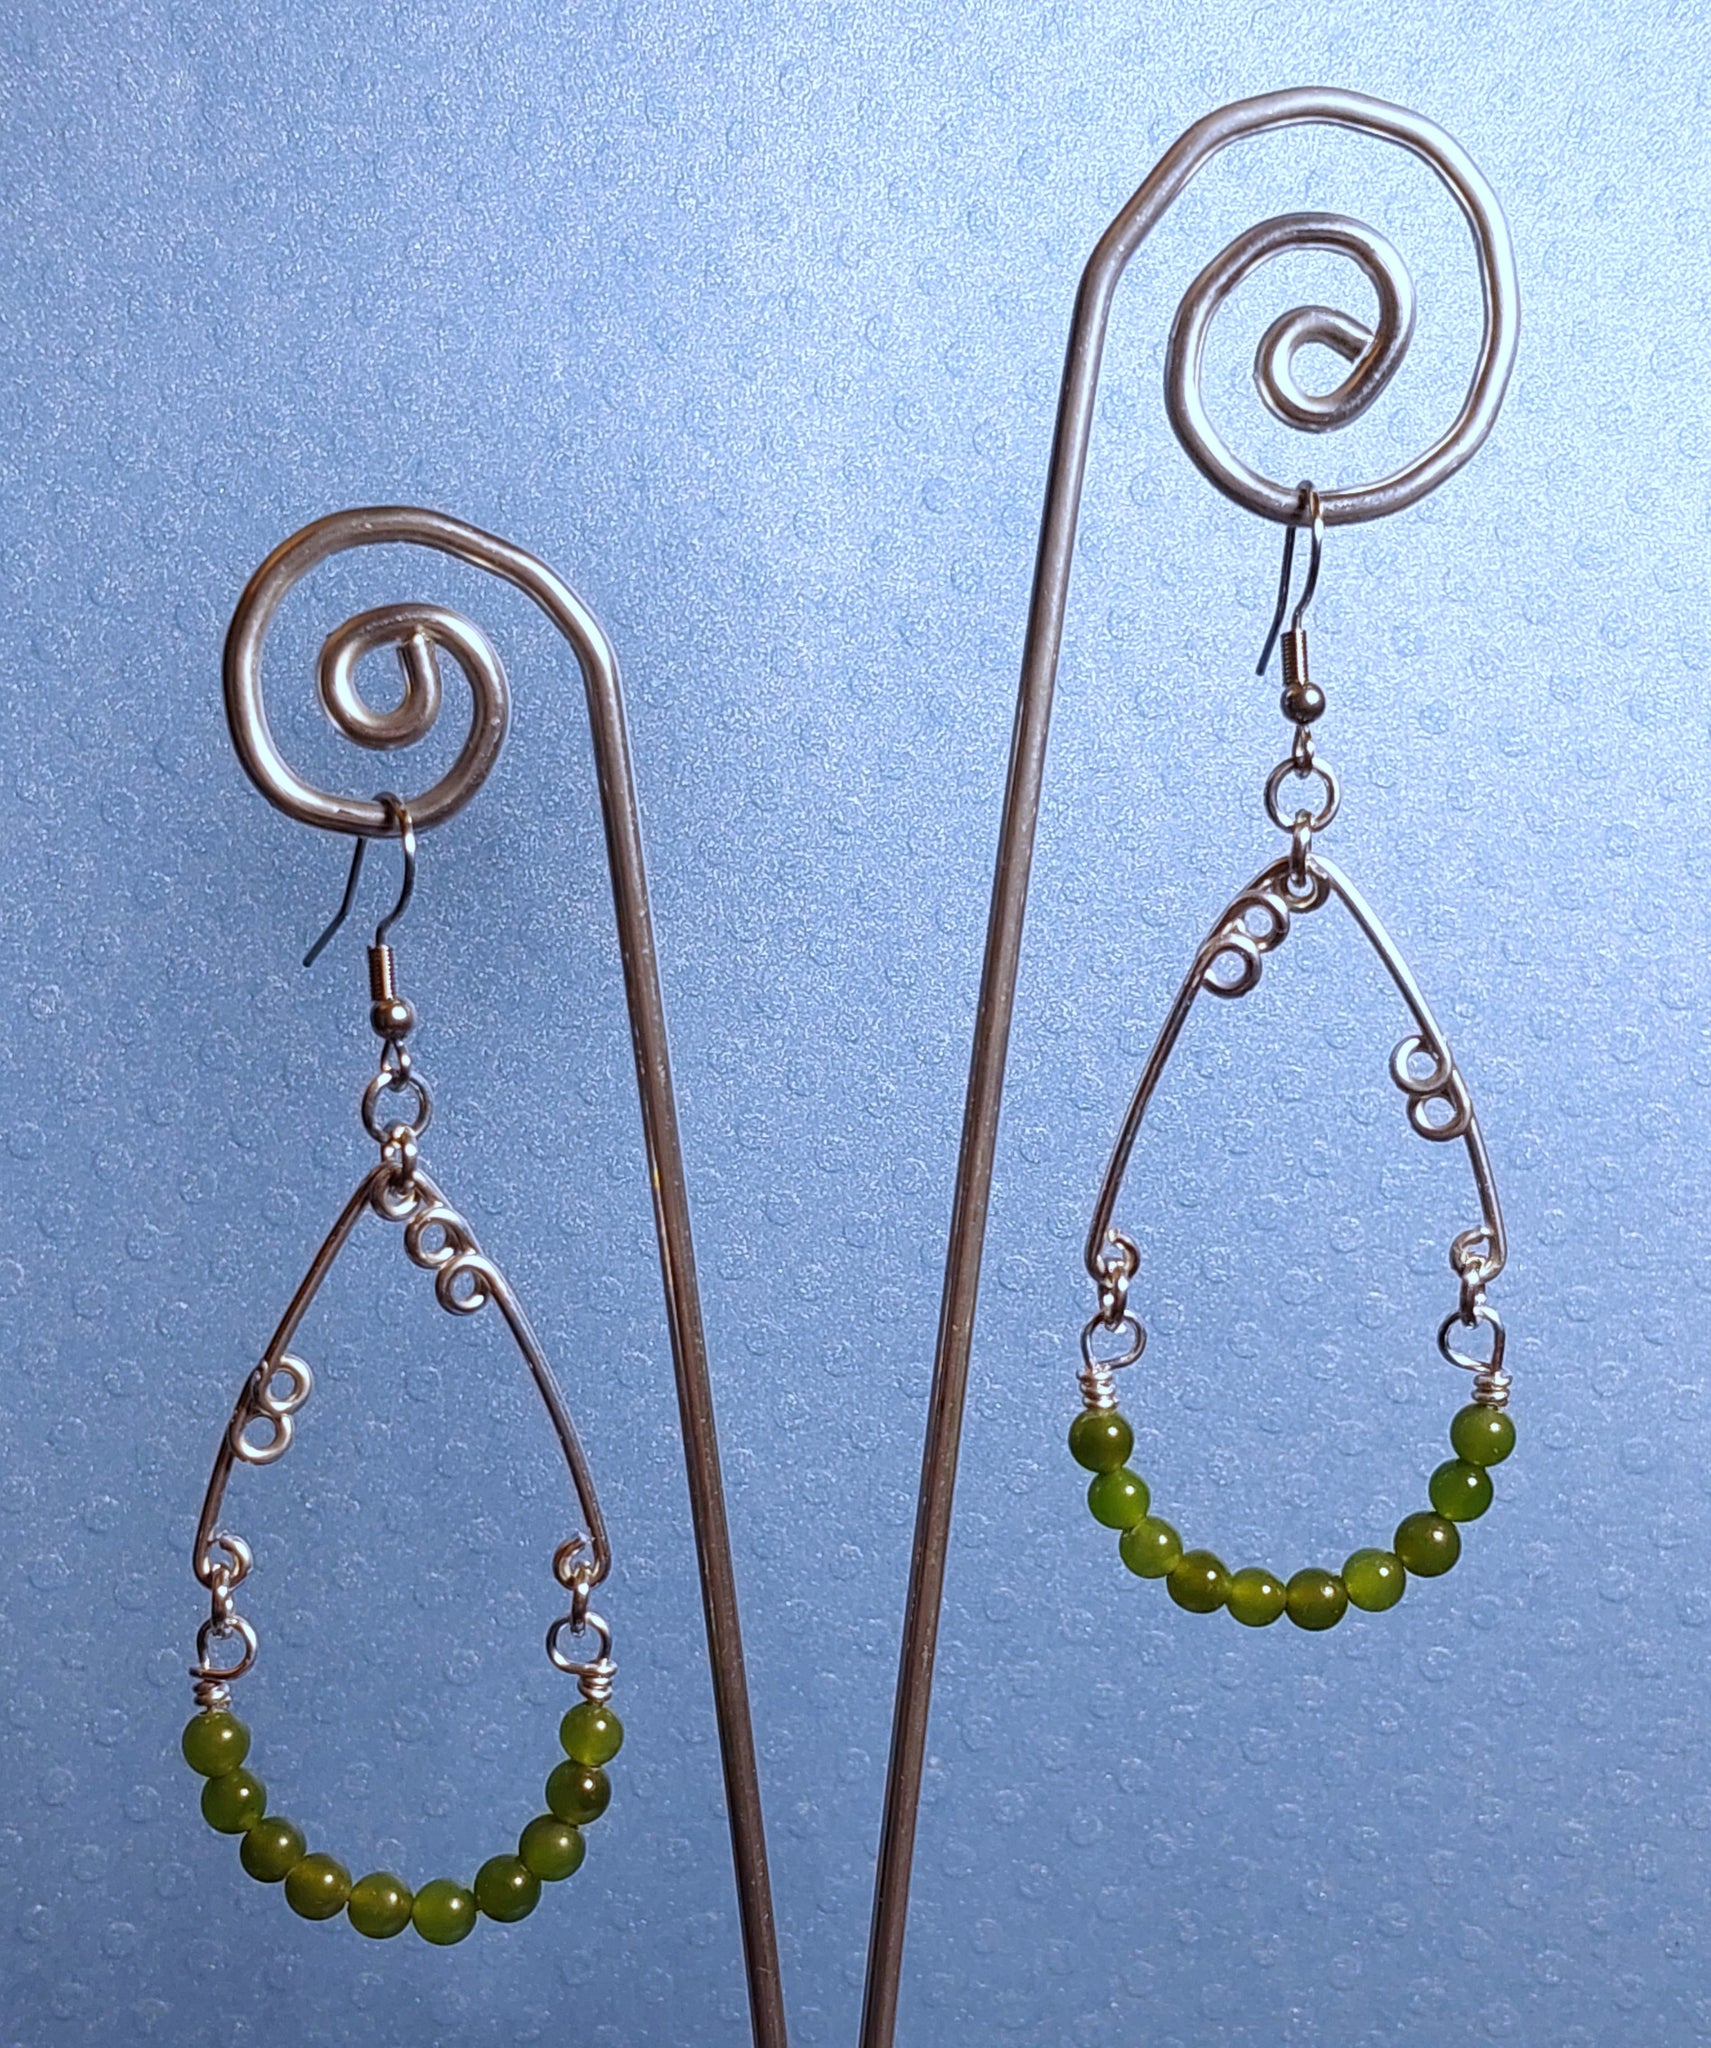 Handcrafted Aluminum Wire Earrings with Jade Beads